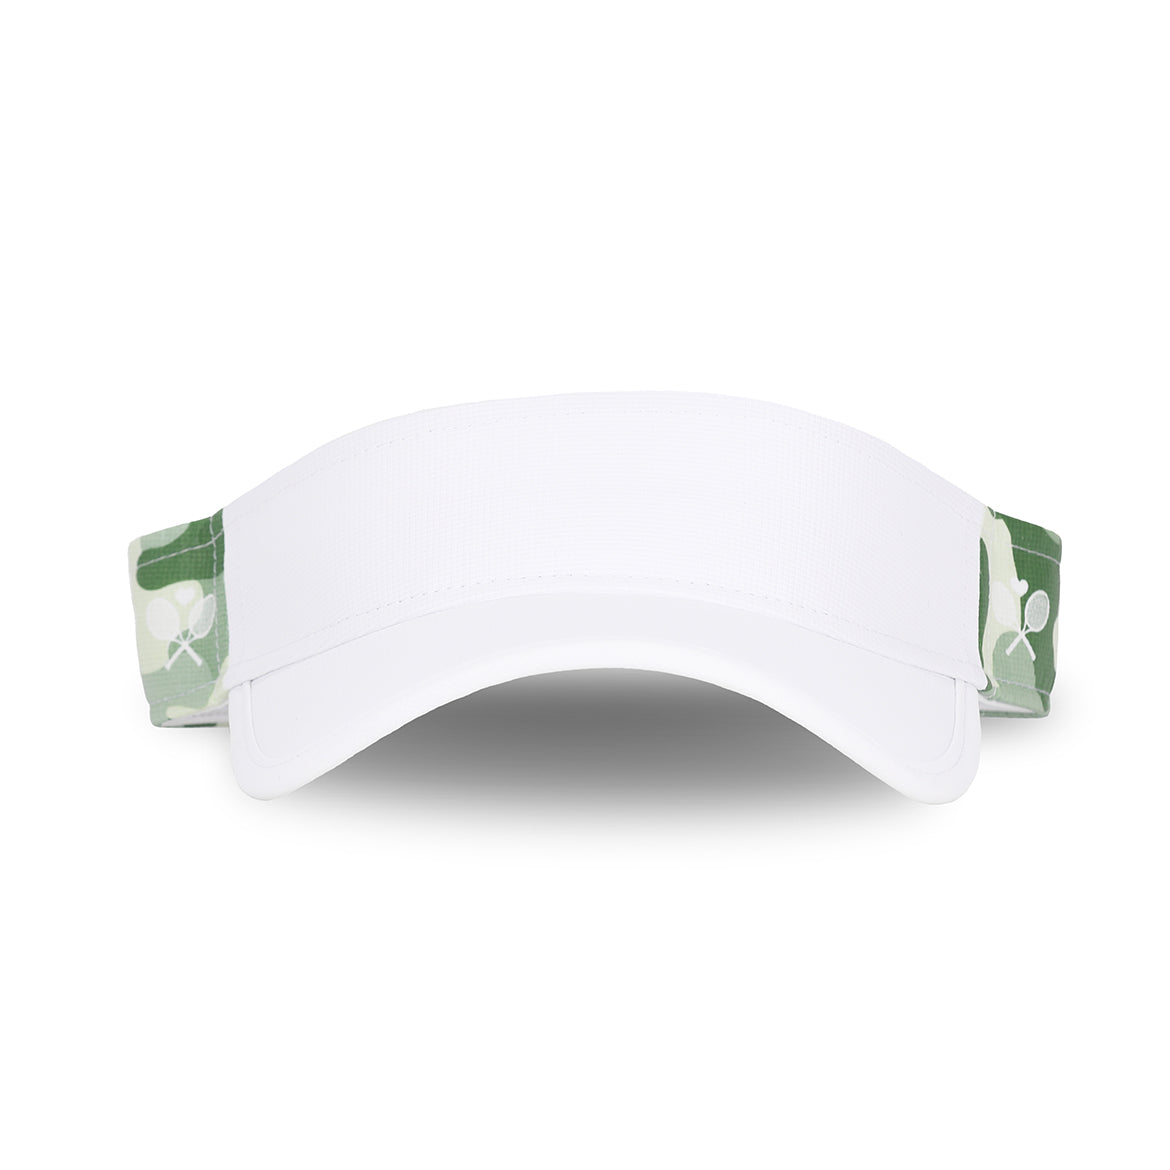 Front view of olive camo head in the game visor. Front of visor is white and sides are olive camo pattern with white crossed racquets printed over the camo.